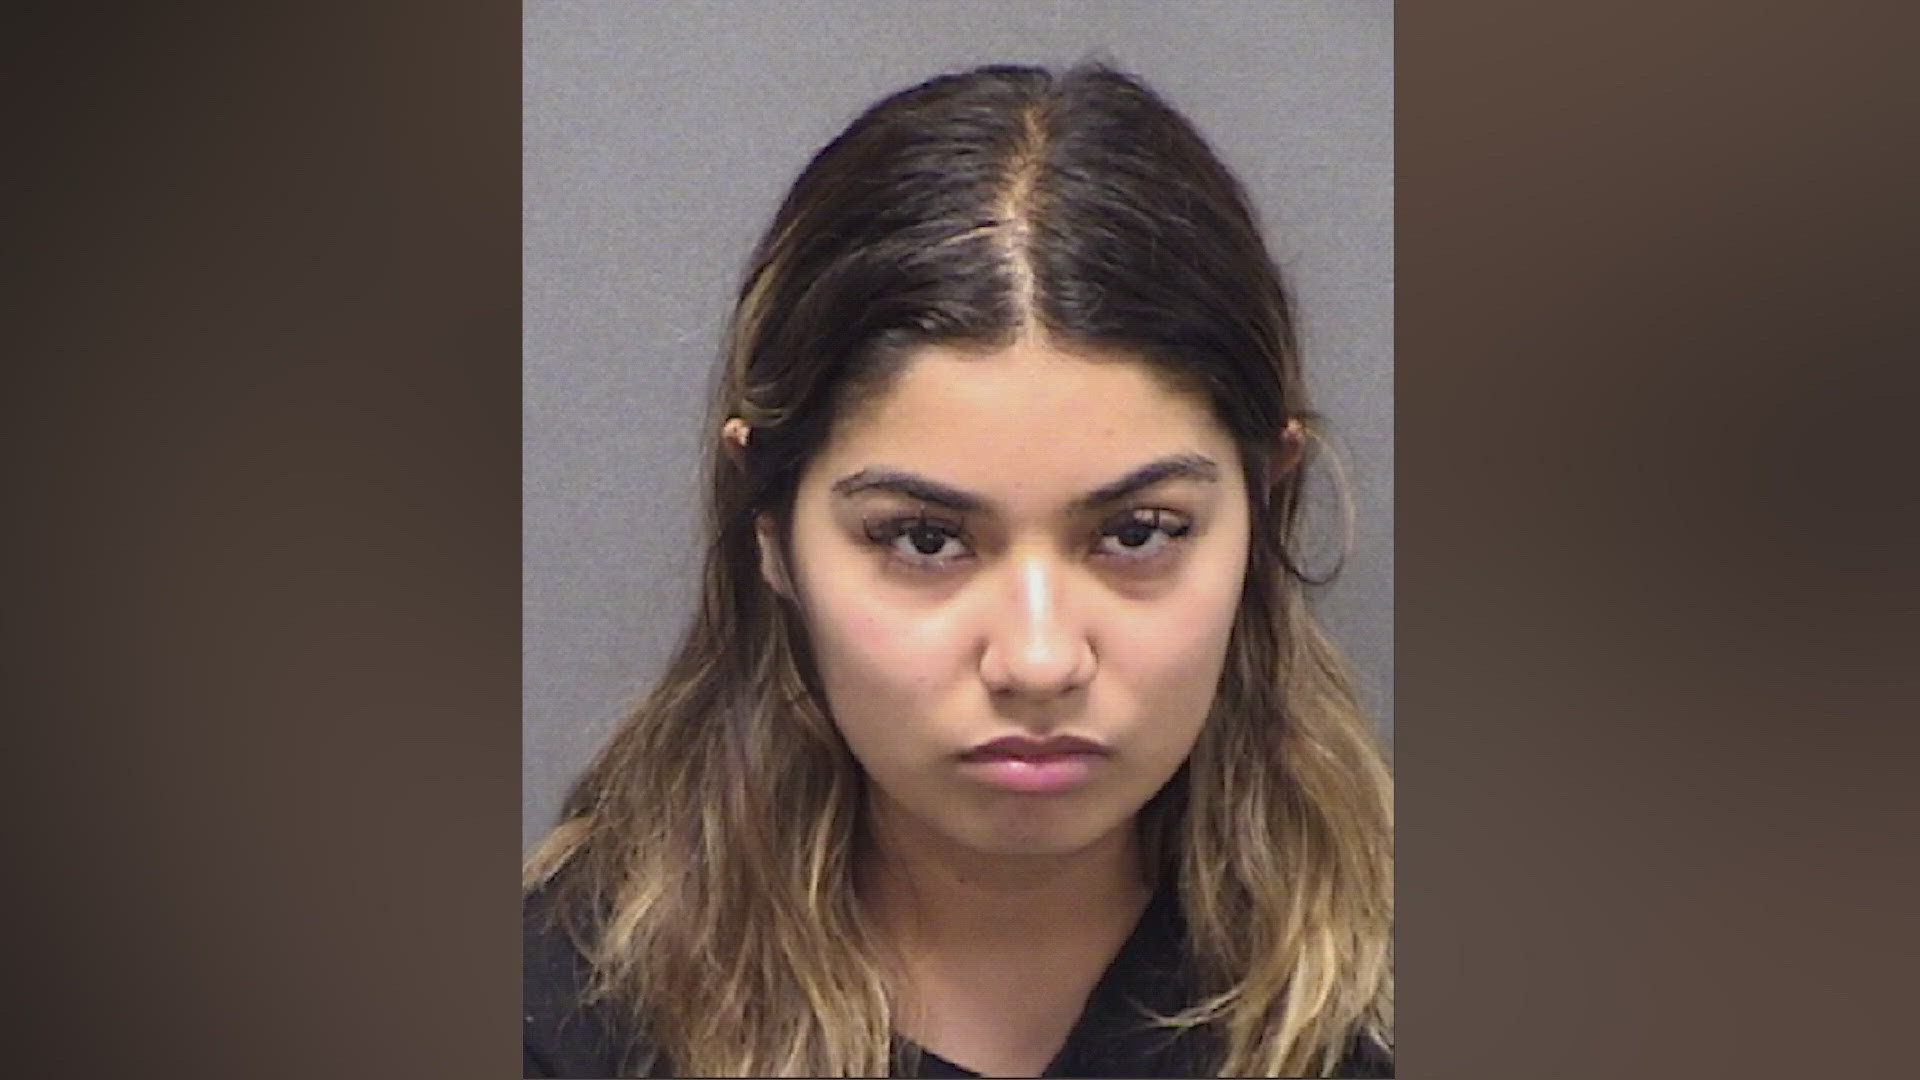 H-E-B employee accused of sending bomb threats, disturbing photos to  coworkers